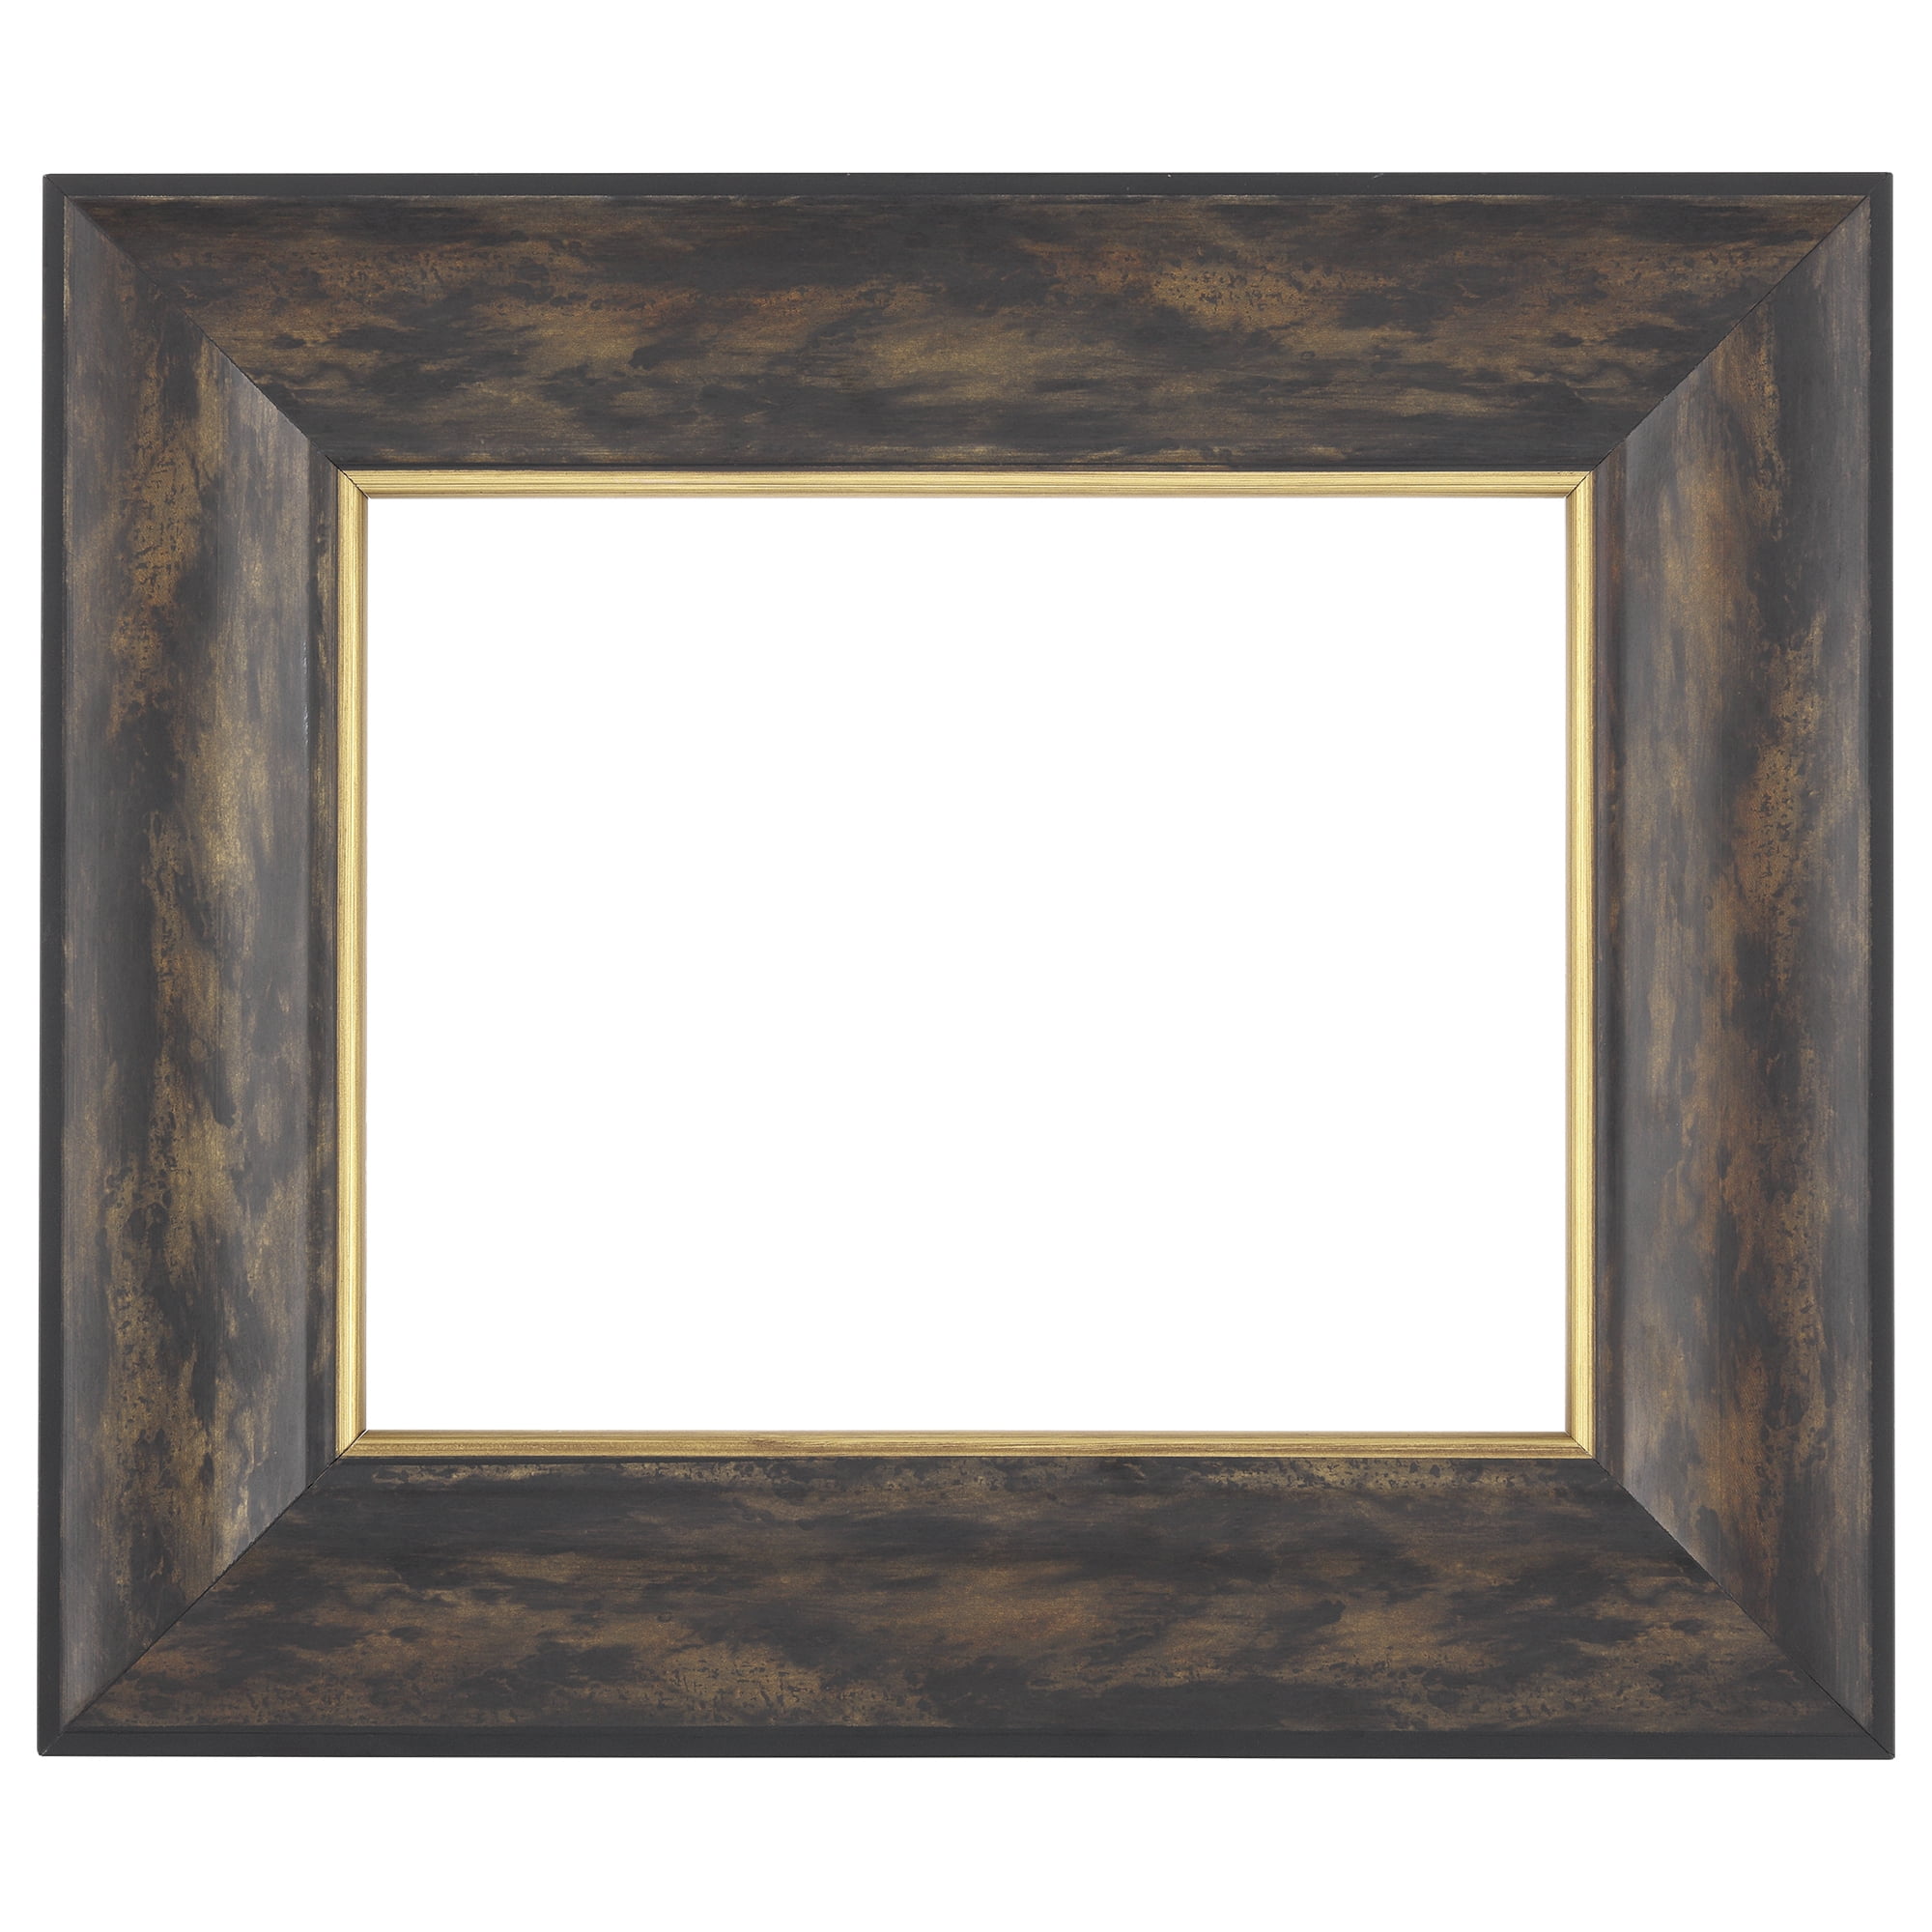 Imperial Frames 6141620 16 by 20-Inch/20 by 16-Inch Picture/Photo Frame,  Dark Gold with Floral Design and a Canvas Liner